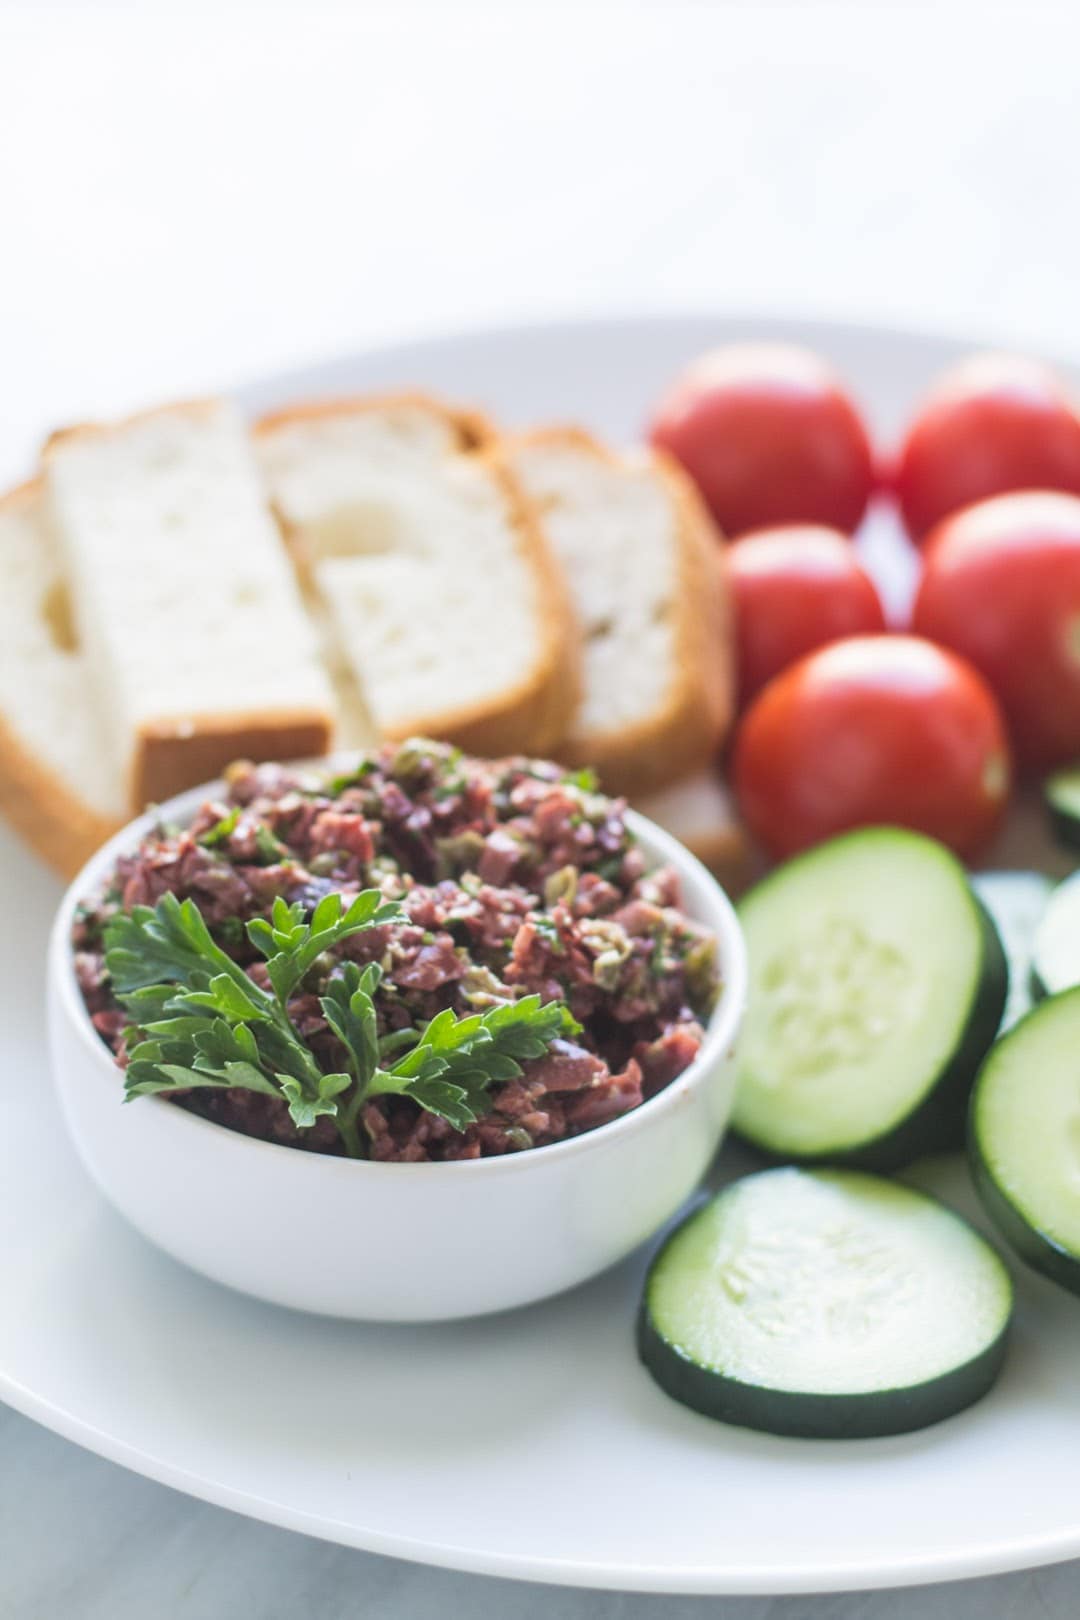 Bowl of low FODMAP olive tapenade surrounded by veggies and gluten-free bread